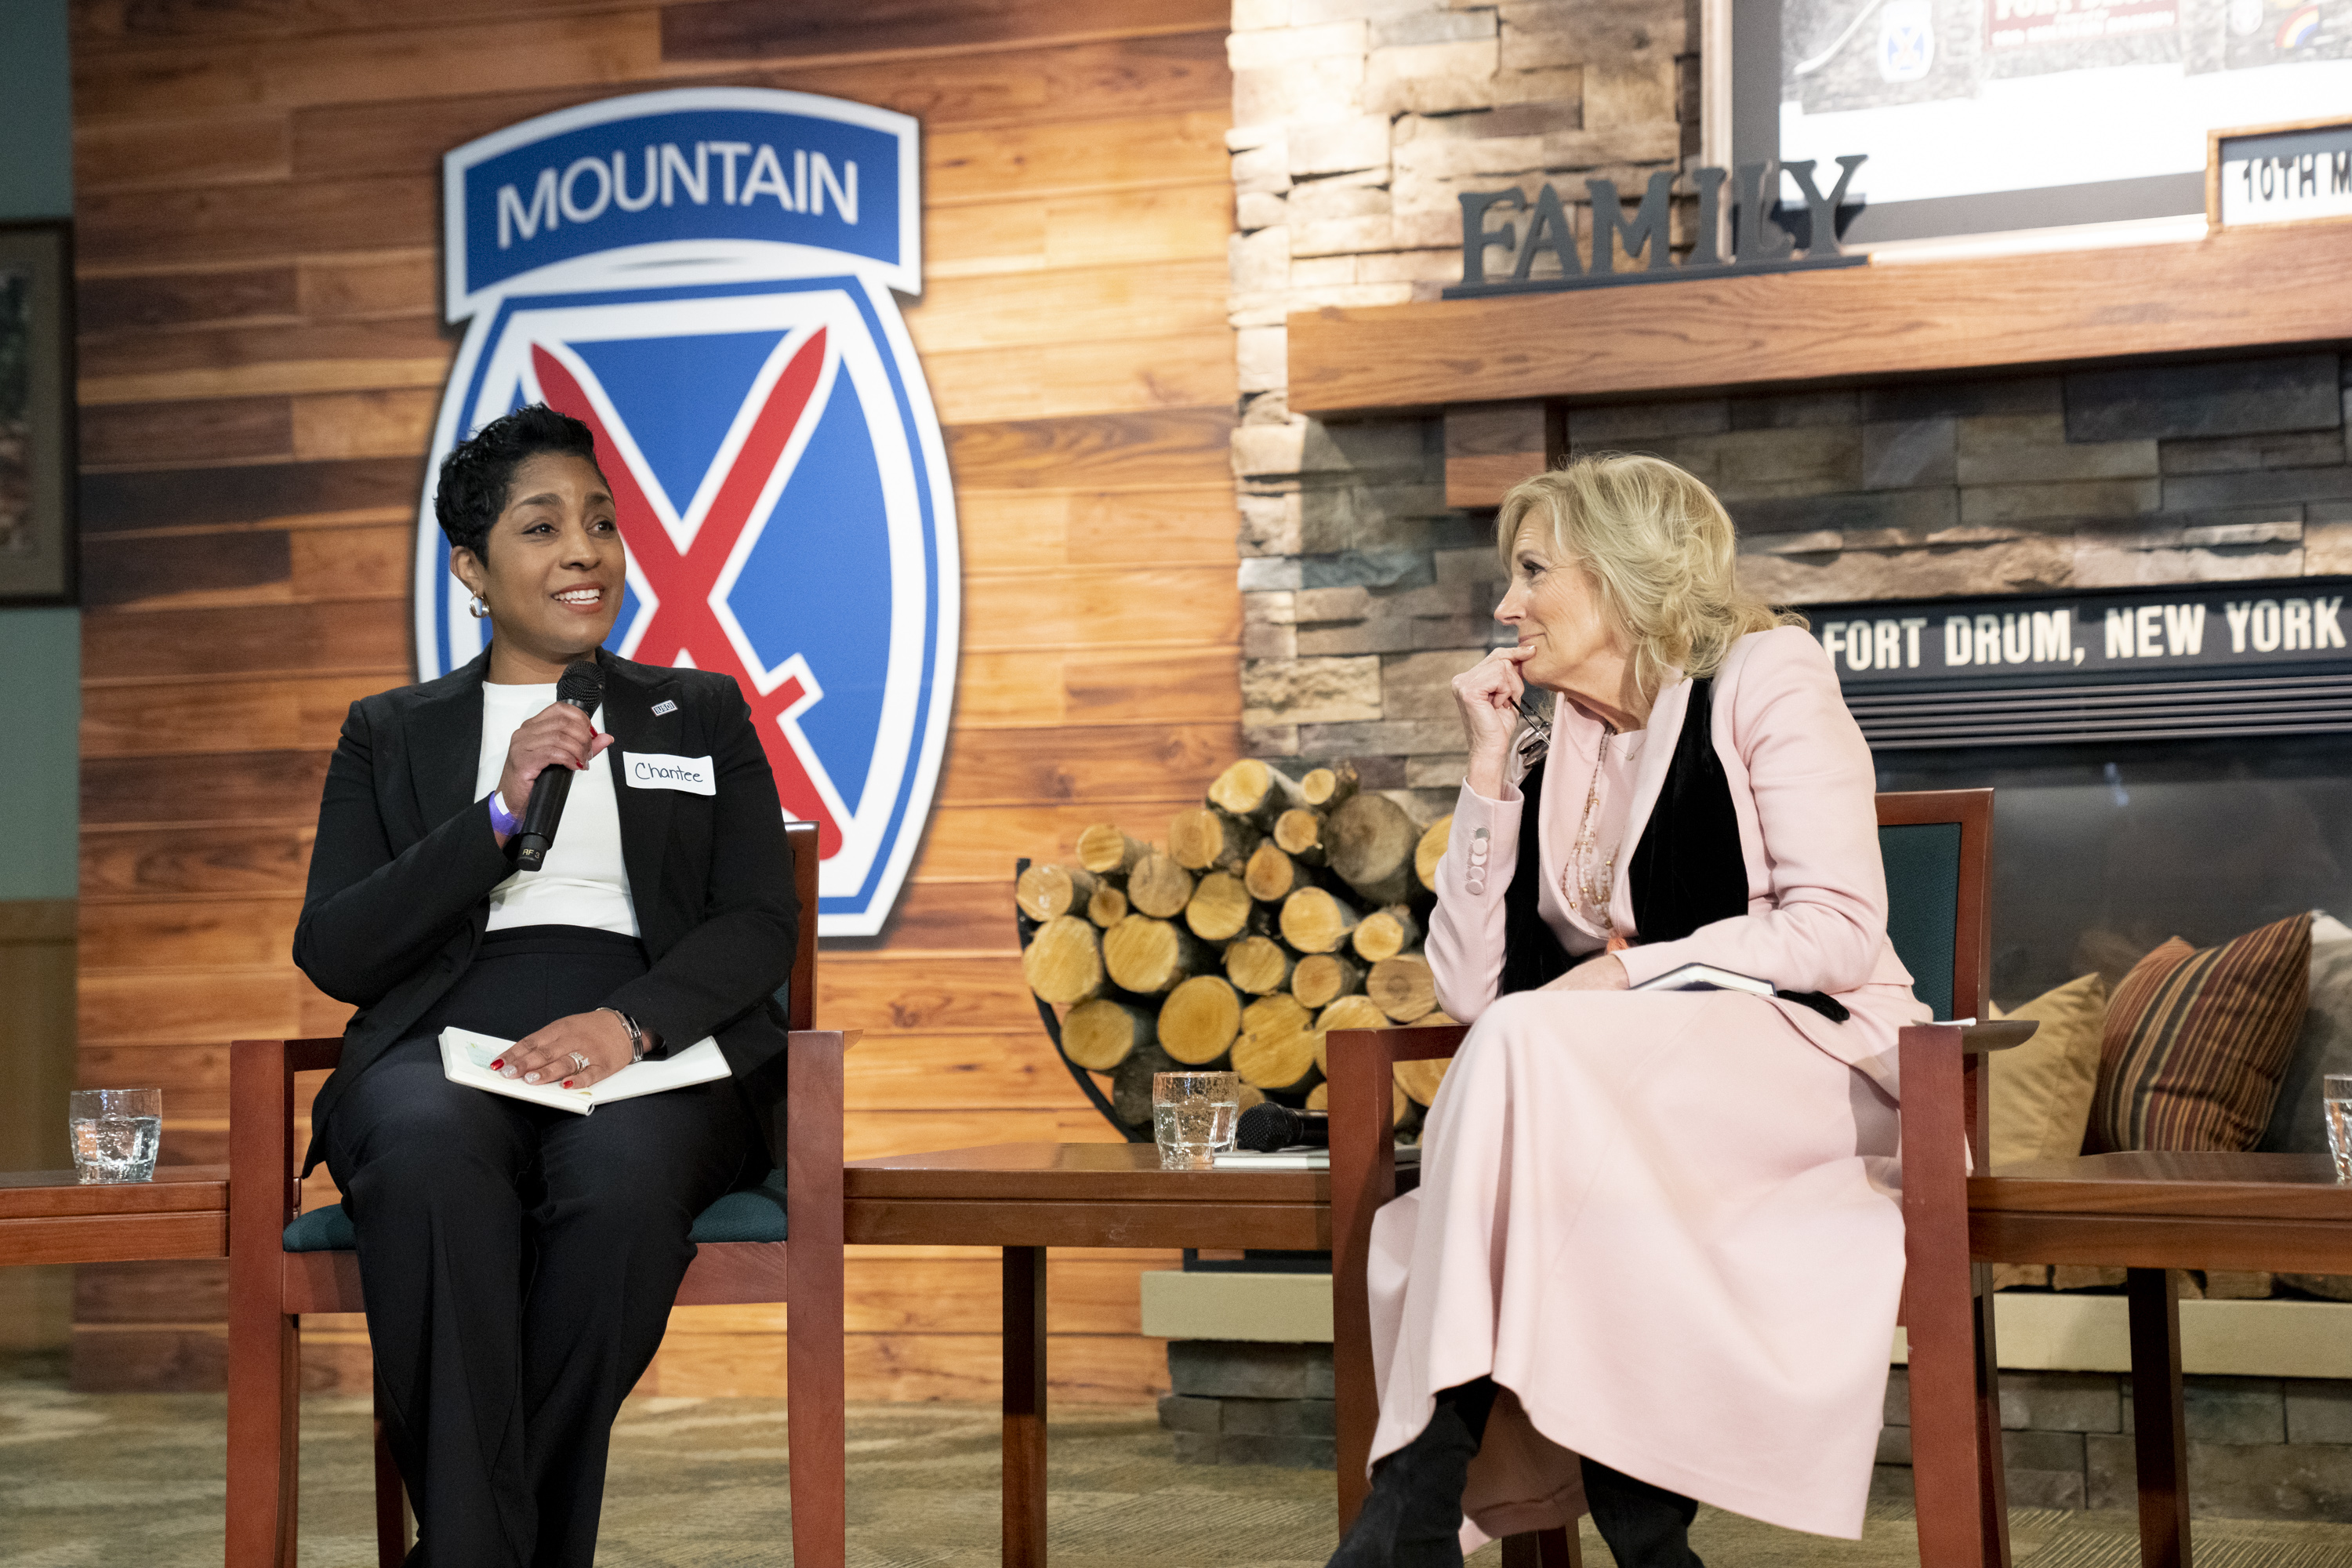 First Lady Jill Biden participates in a roundtable event on military spouse economic opportunity, Monday, January 30, 2023, at the Soldier and Family Resource Center at Fort Drum, New York.